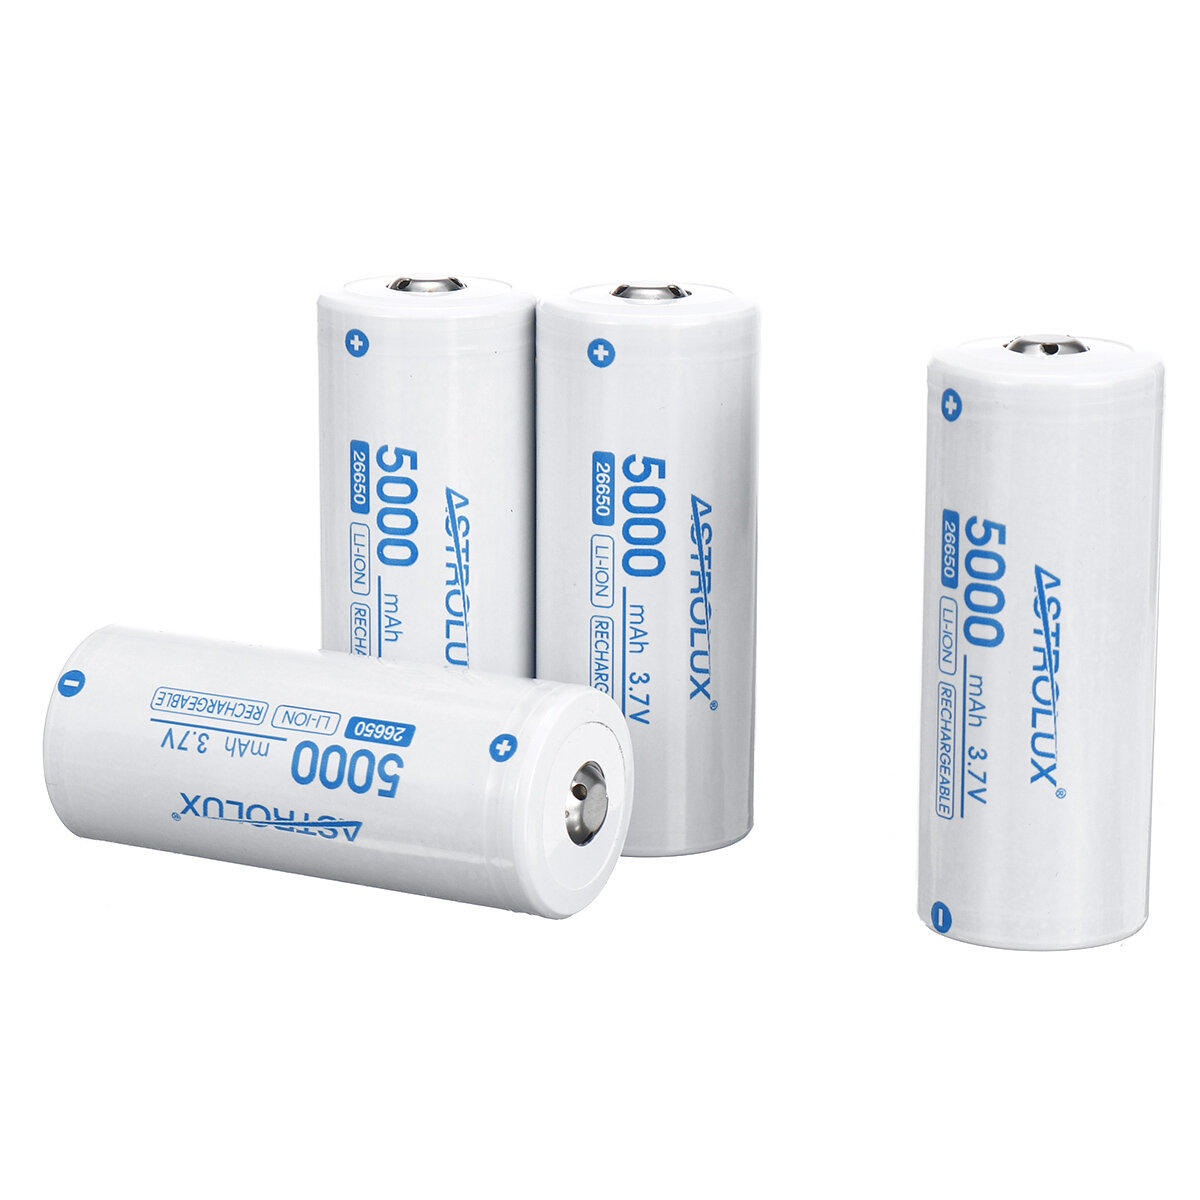 best price,4x,astrolux,c2650,5000mah,3c,3.6v,battery,15a,discount